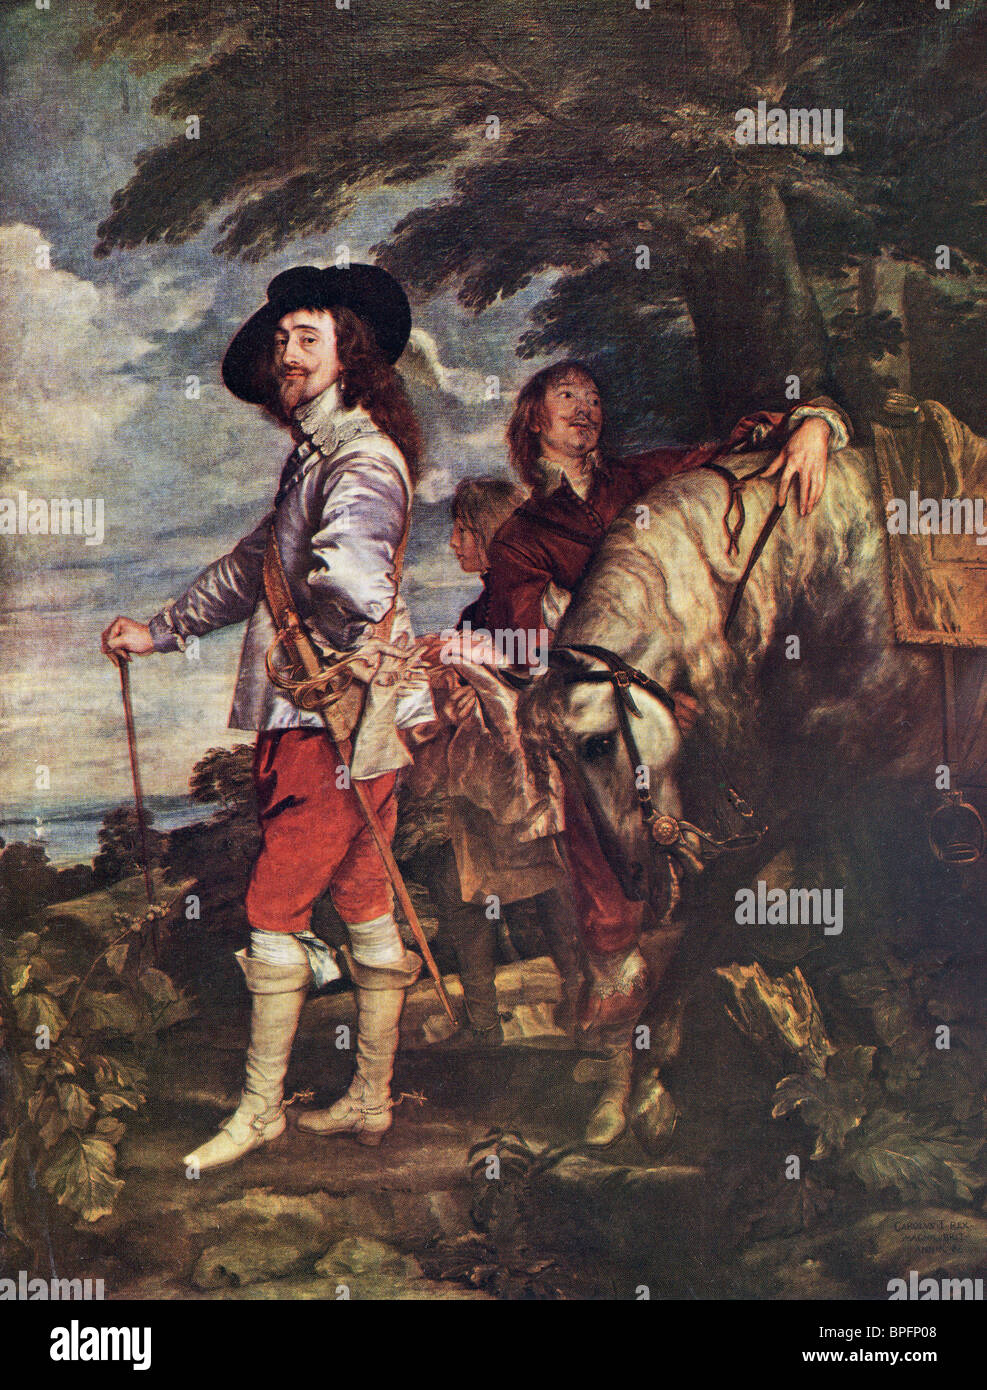 Charles I. Painting by Sir Anthony Van Dyck. King Charles I of England, 1600 - 1649. Stock Photo